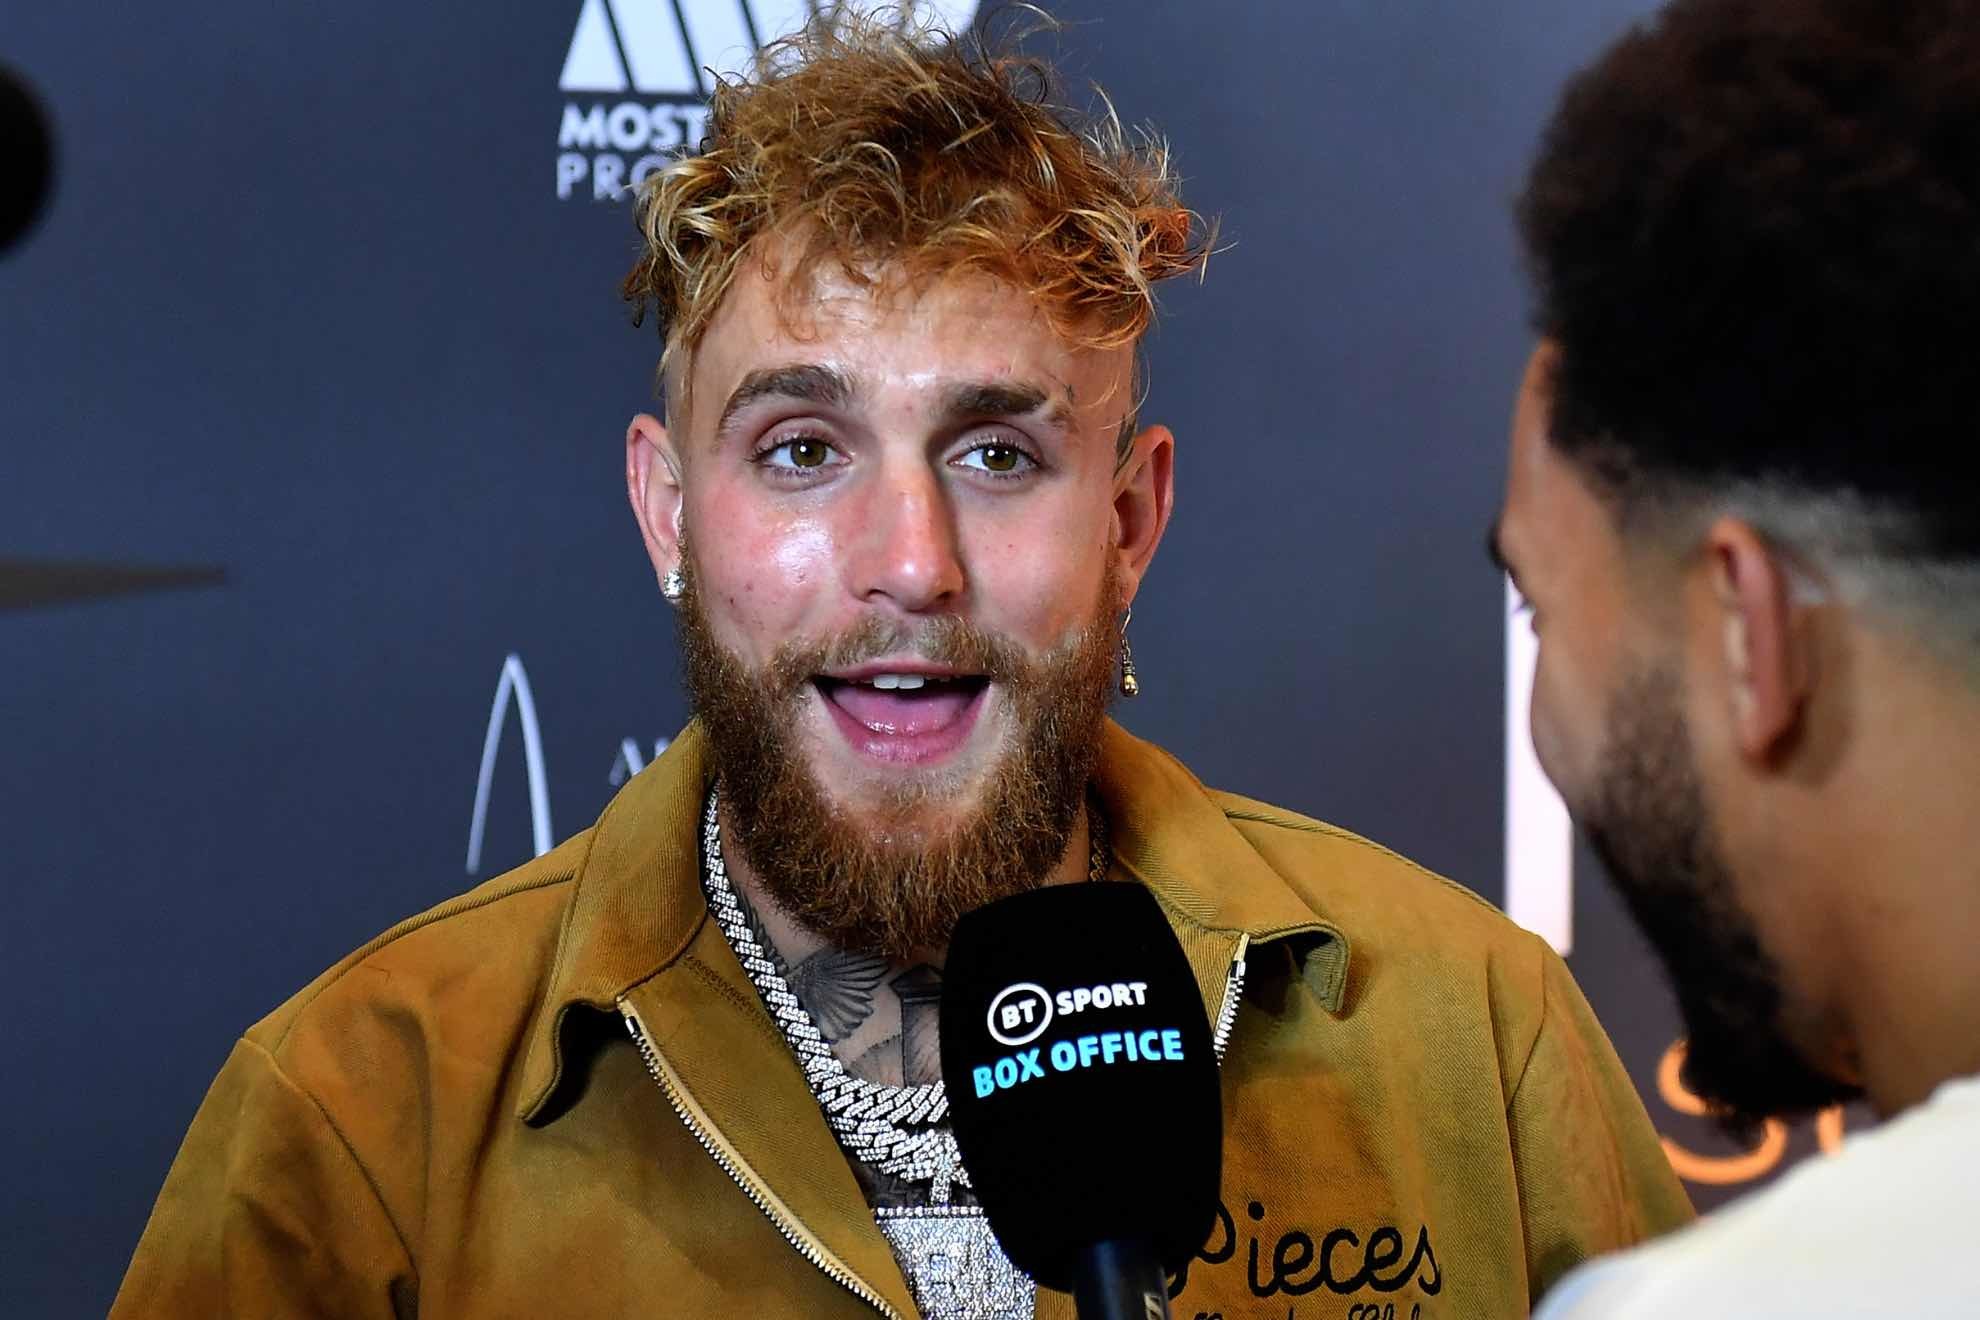 Jake Paul is turning the Mike Tyson fight into a mega event